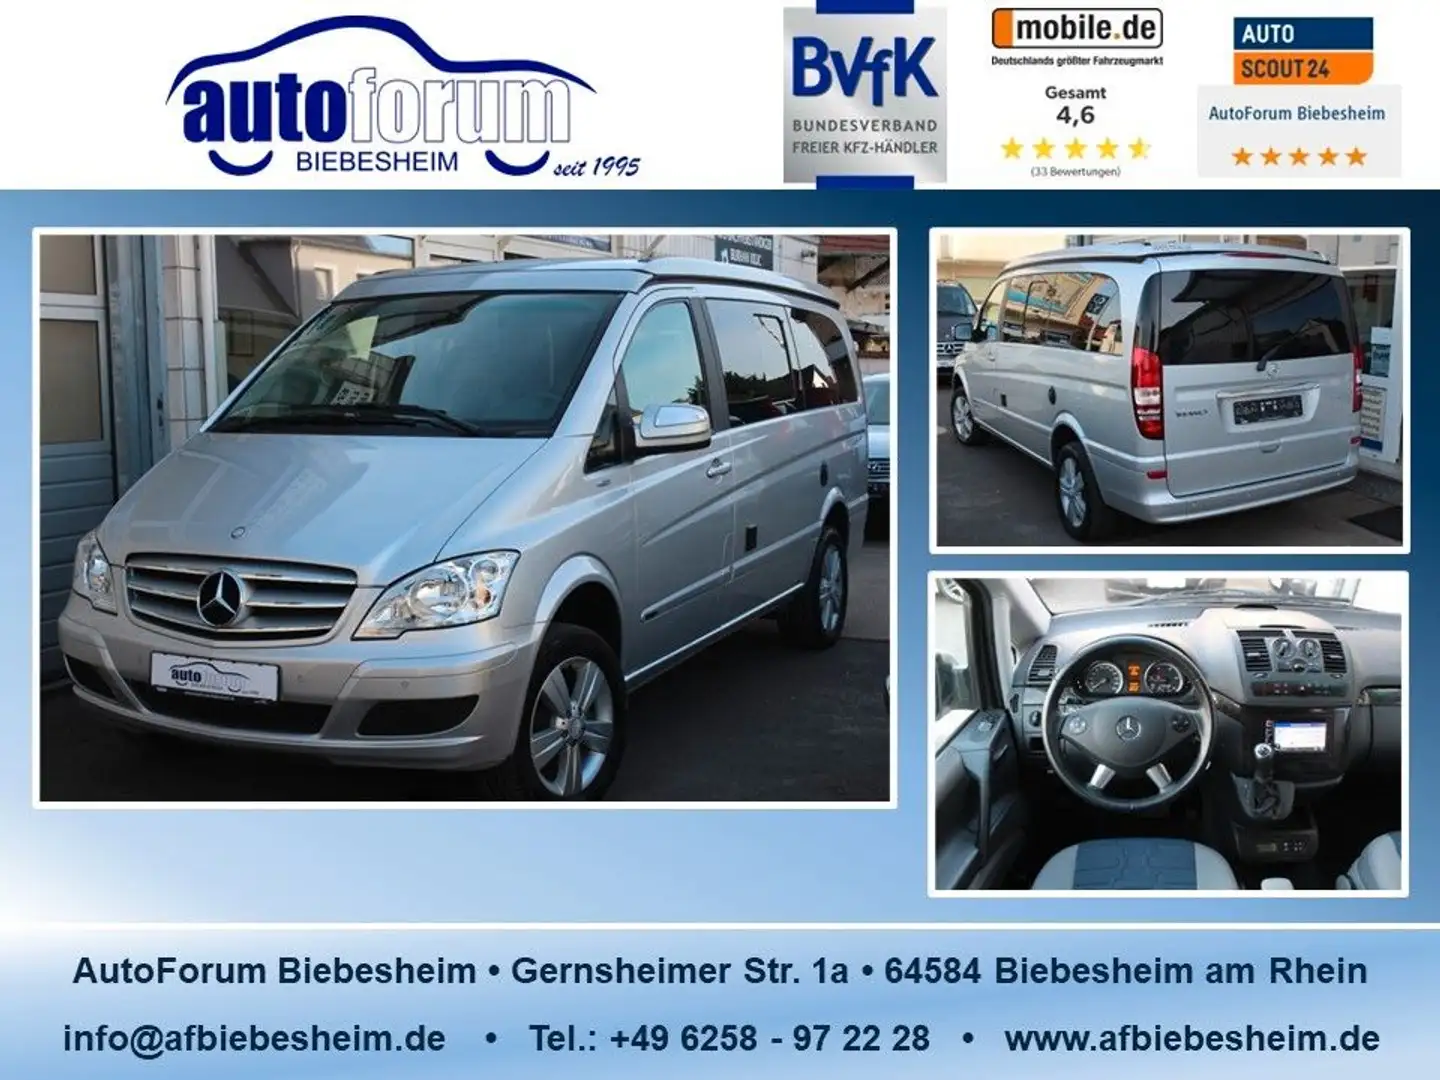 Mercedes-Benz Viano Marco Polo 2.2 CDI 4MATIC Wohnmobil Stdhzg Argent - 1